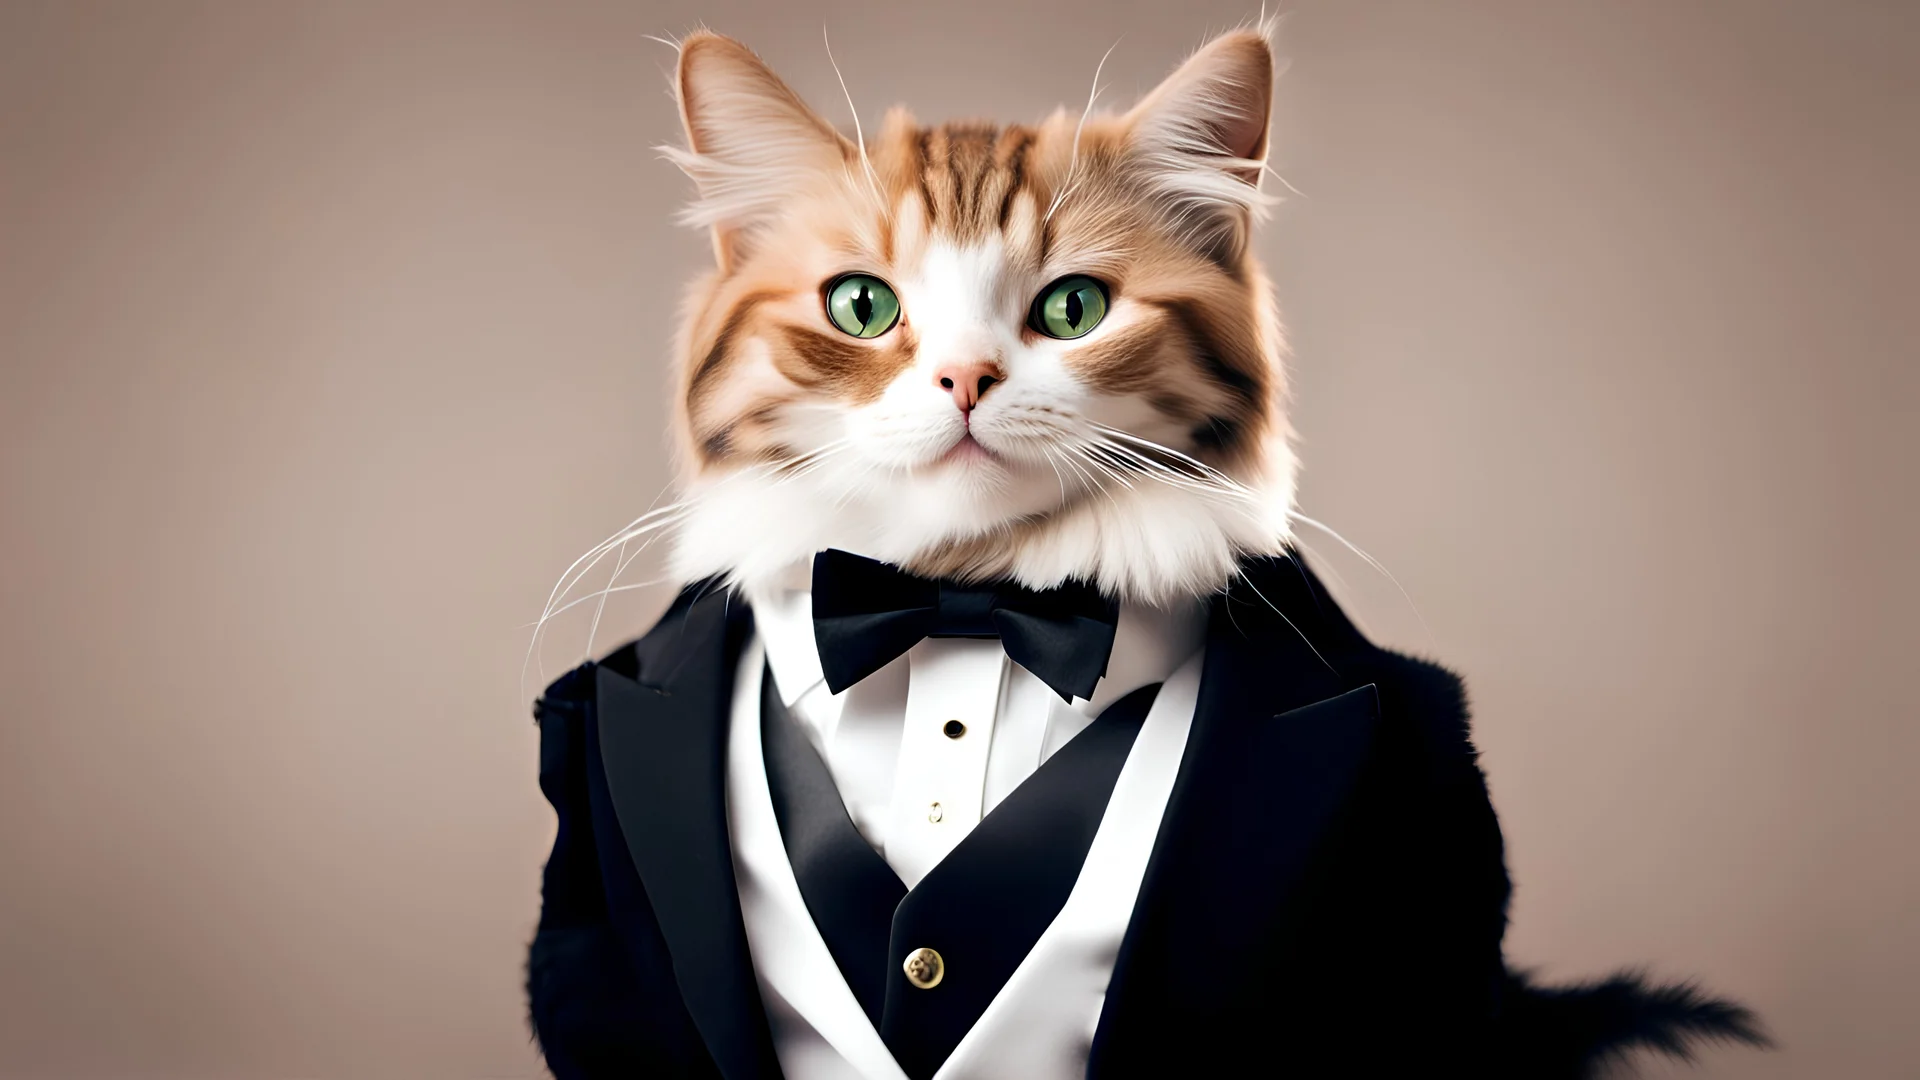 A cat in a tuxedo, such an important one.